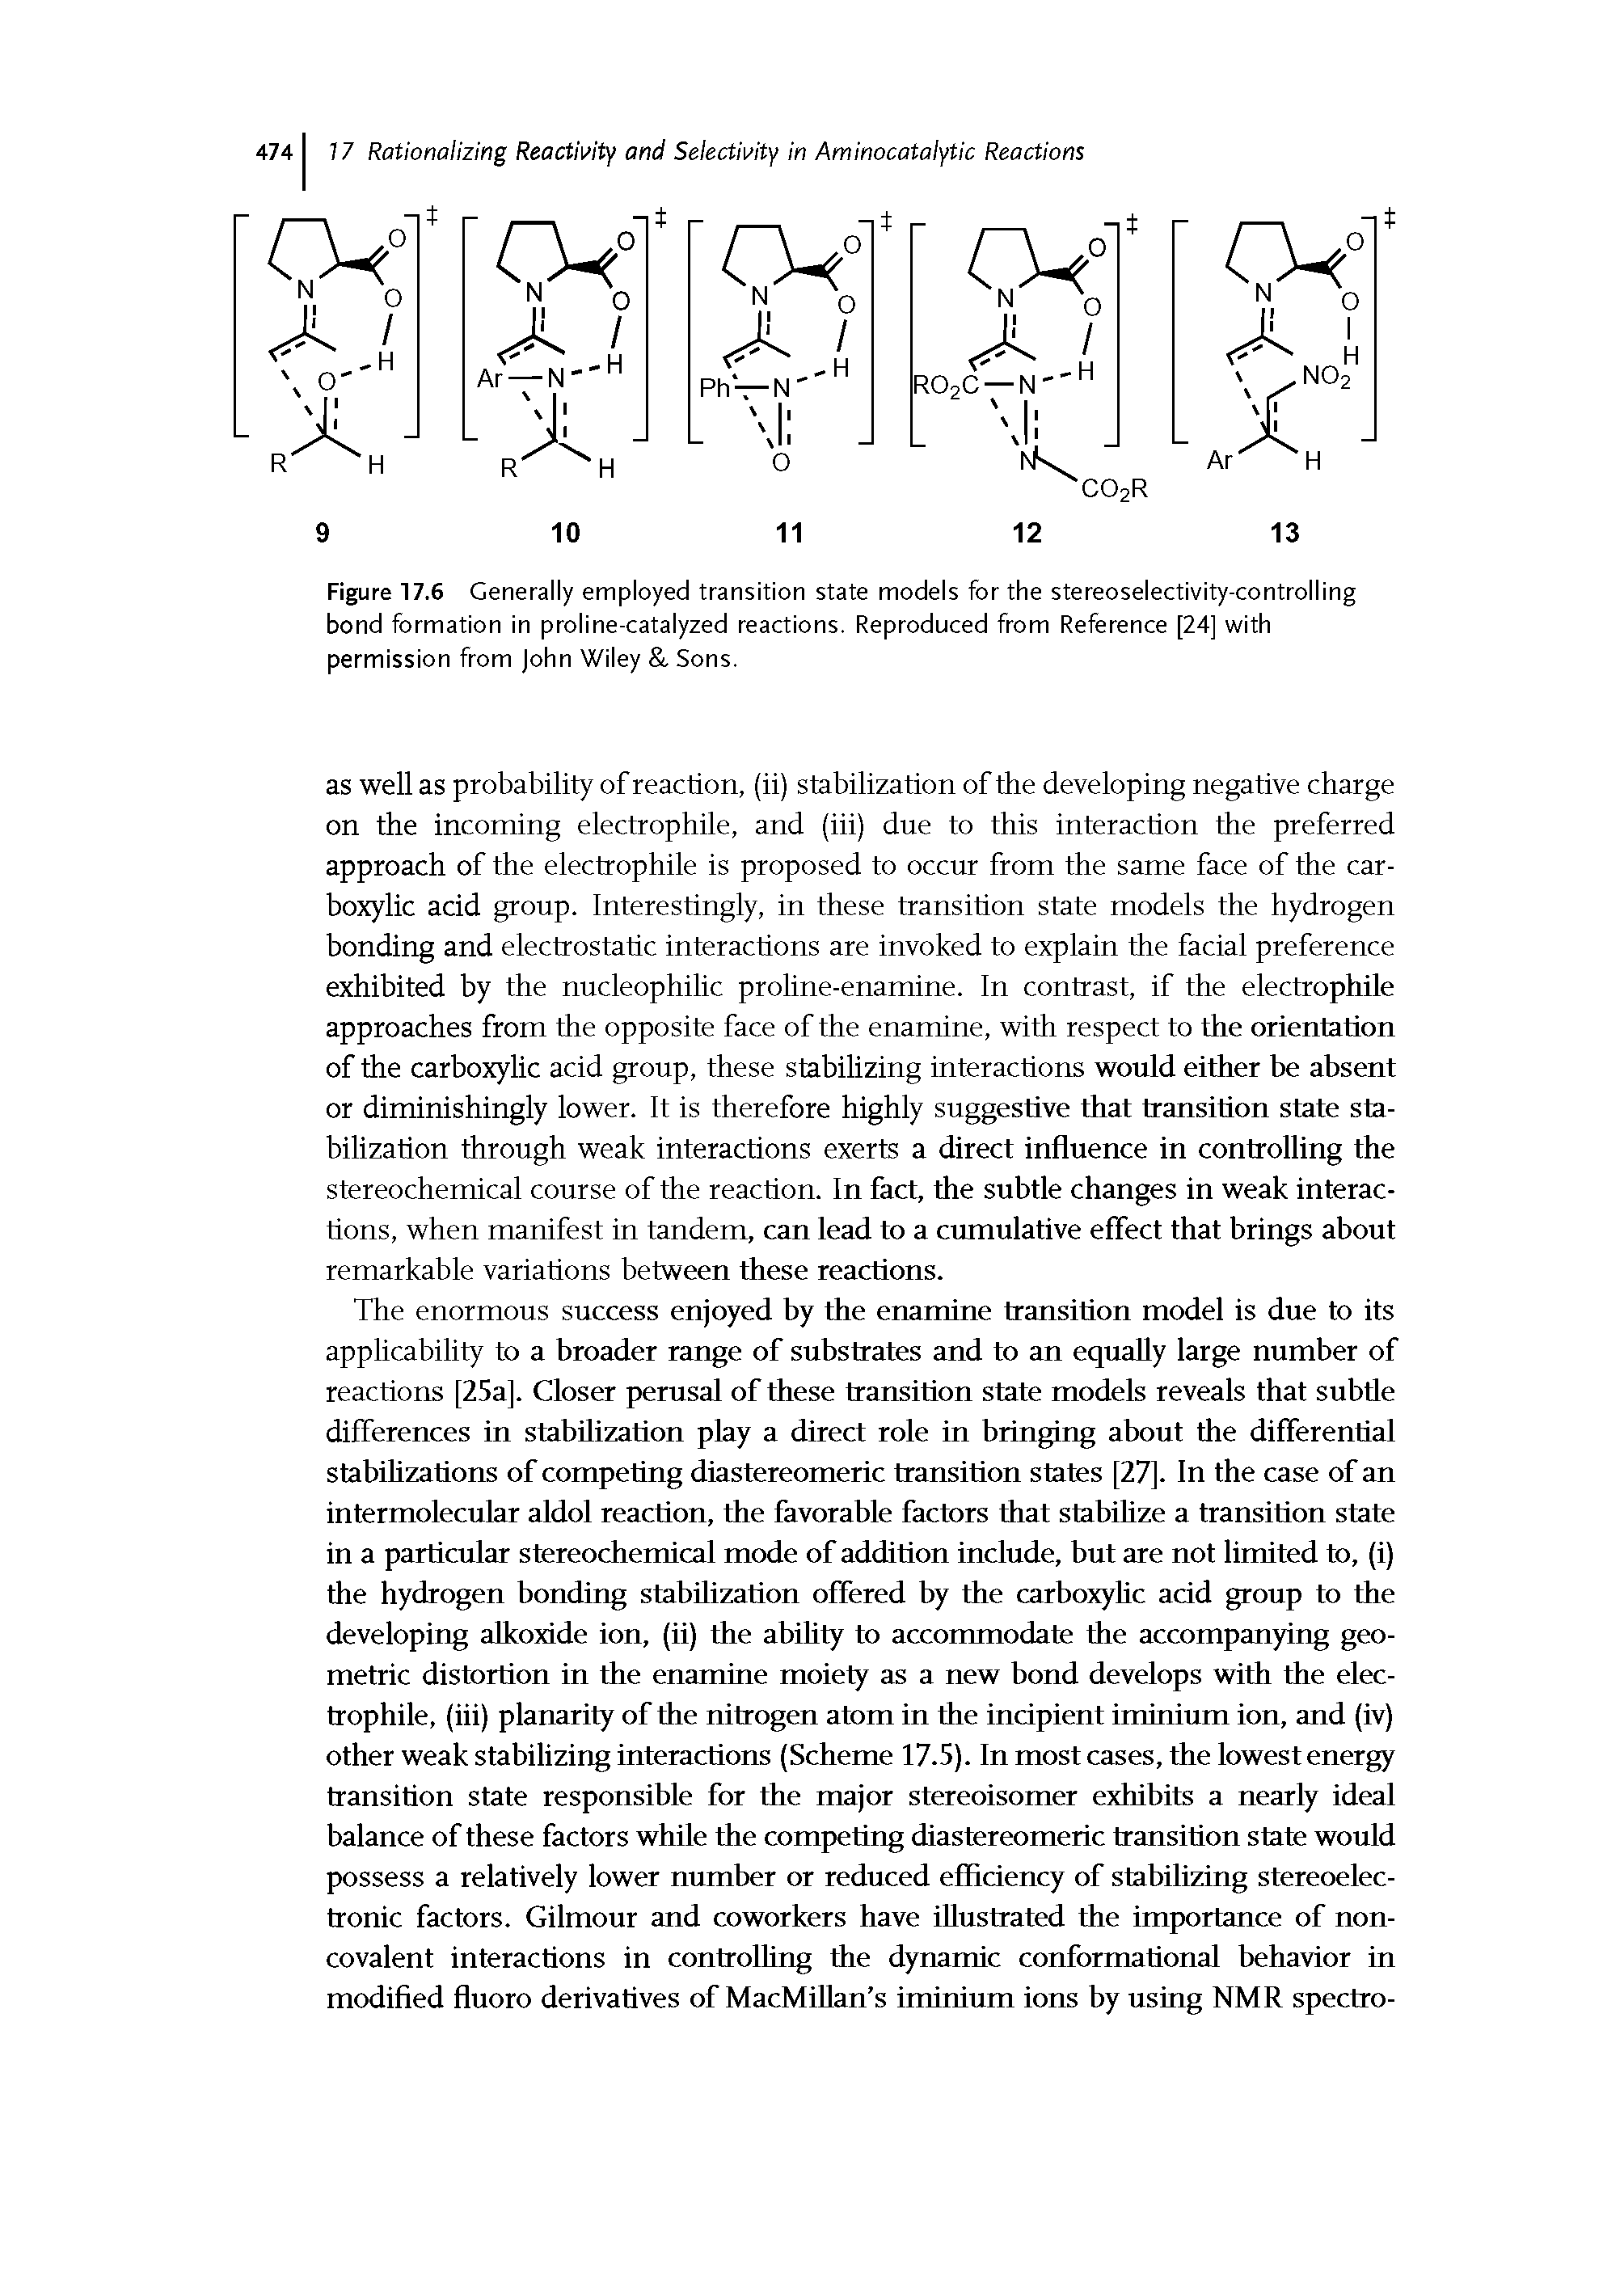 Figure 17.6 Generally employed transition state models for the stereoselectivity-controlling bond formation in proline-catalyzed reactions. Reproduced from Reference [24] with permission from John Wiley Sons.